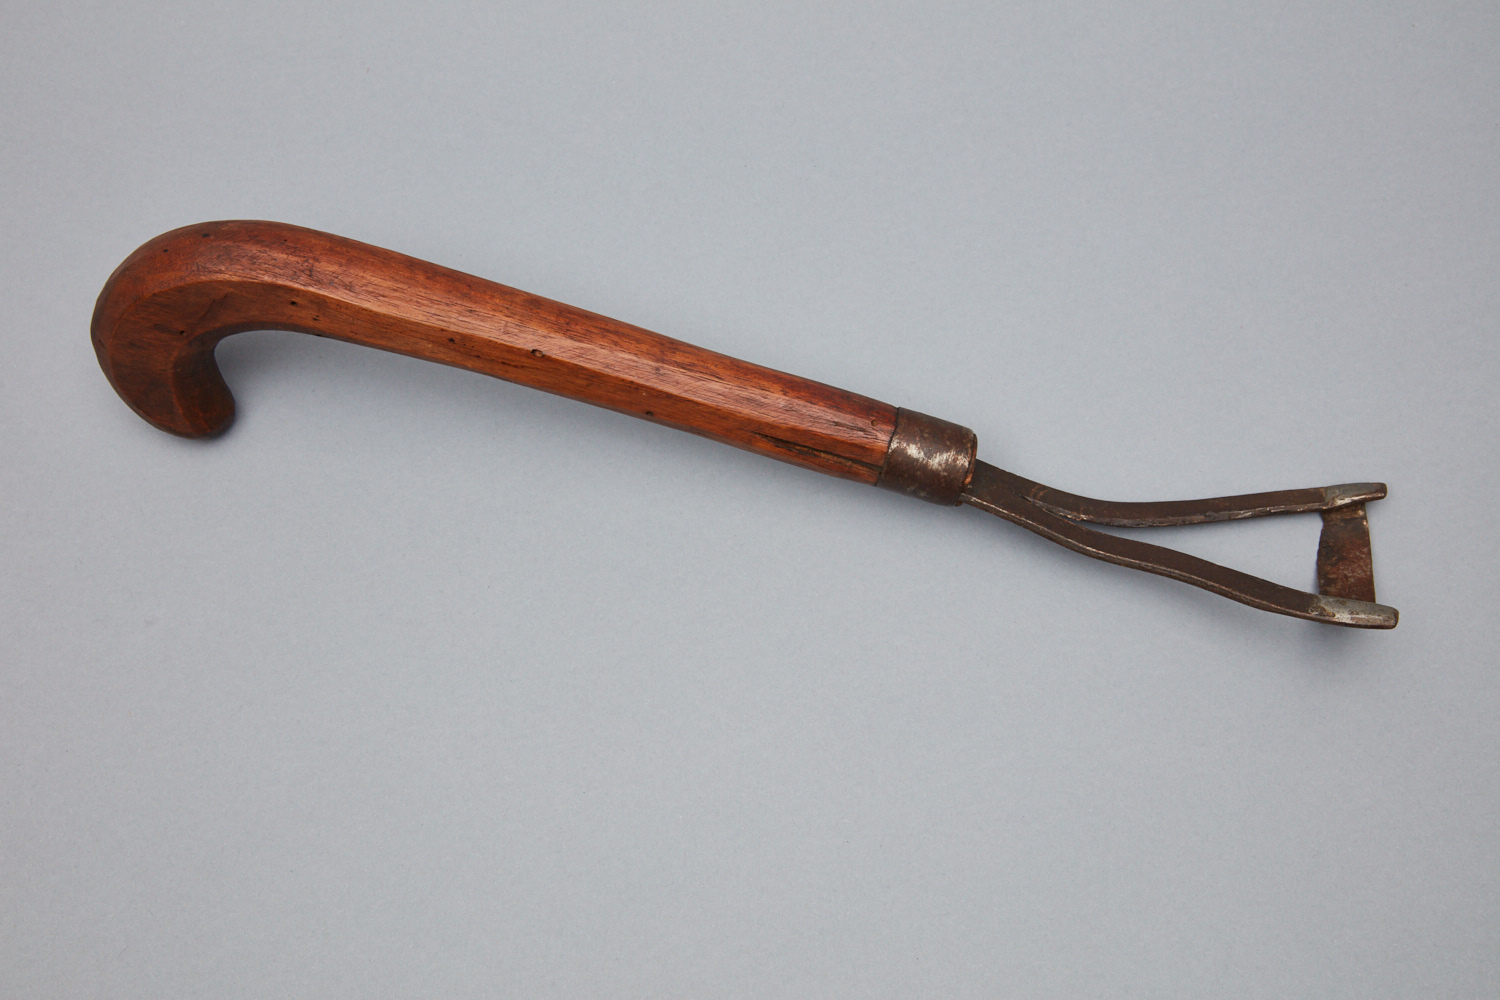 A wooden cane with a wooden handle.